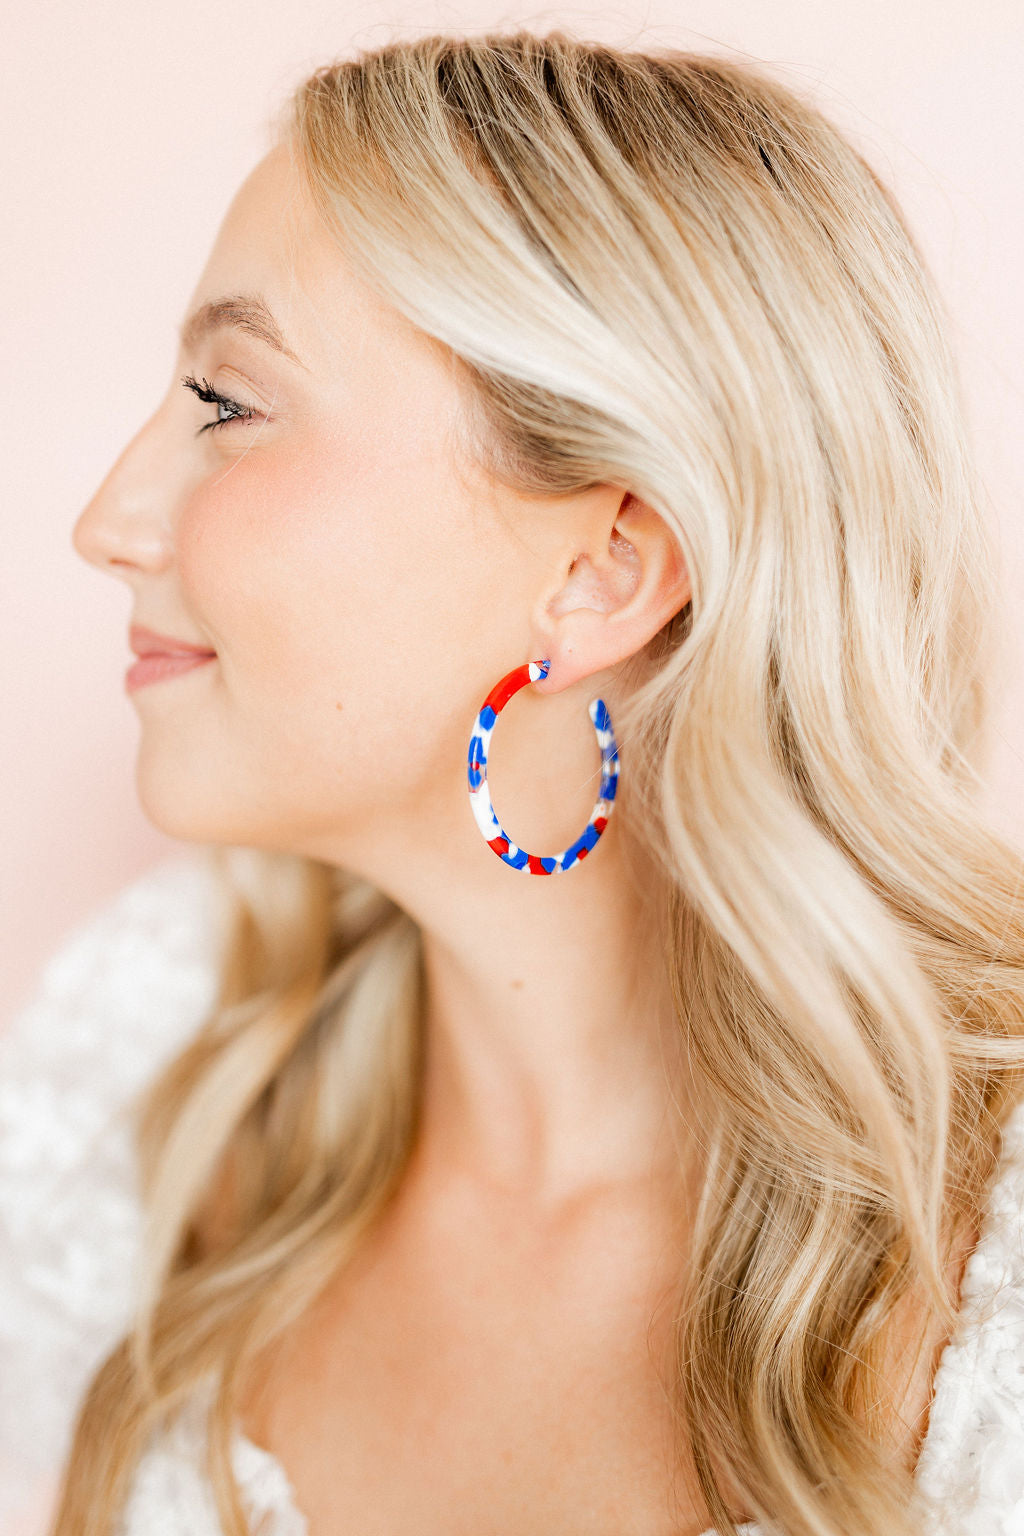 Holly - Medium - Red, White and Blue